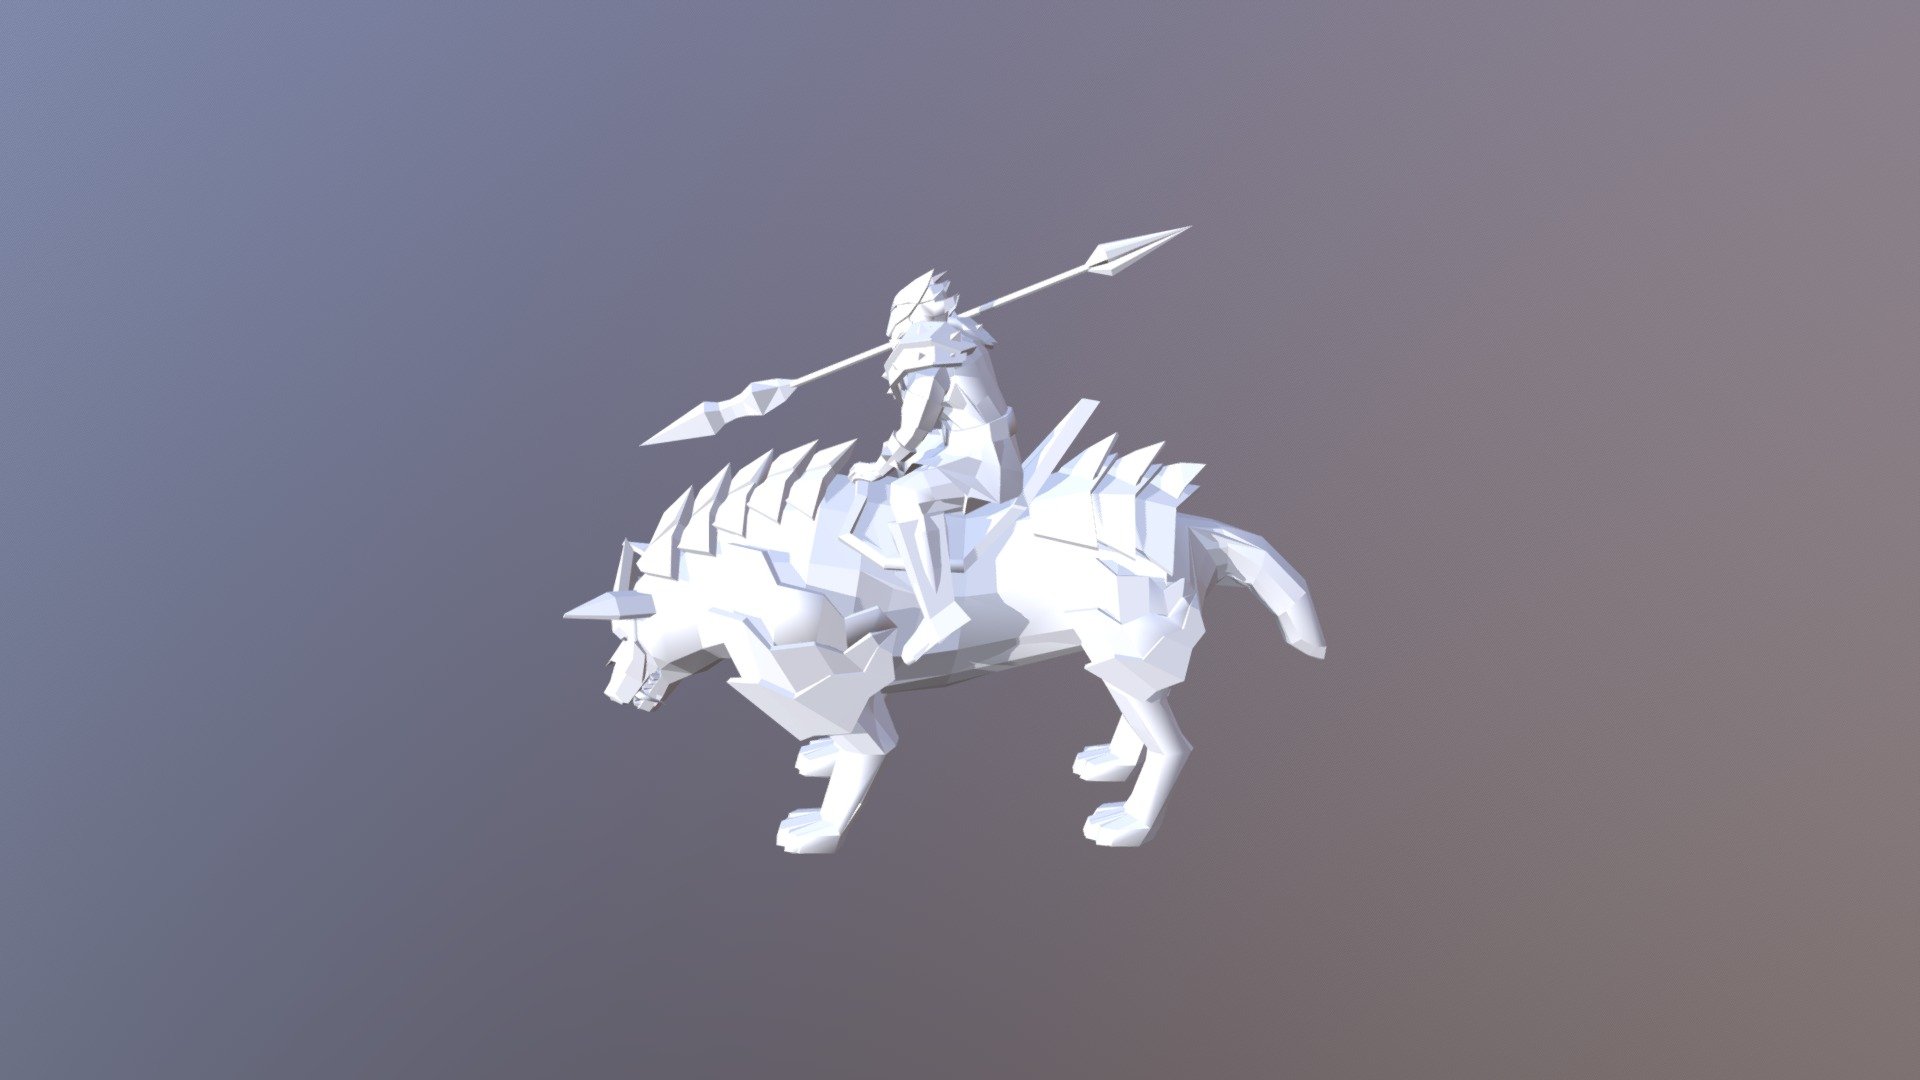 A low poly character - Low Poly Wolf Rider - 3D model by xxxtvvgge 3d model